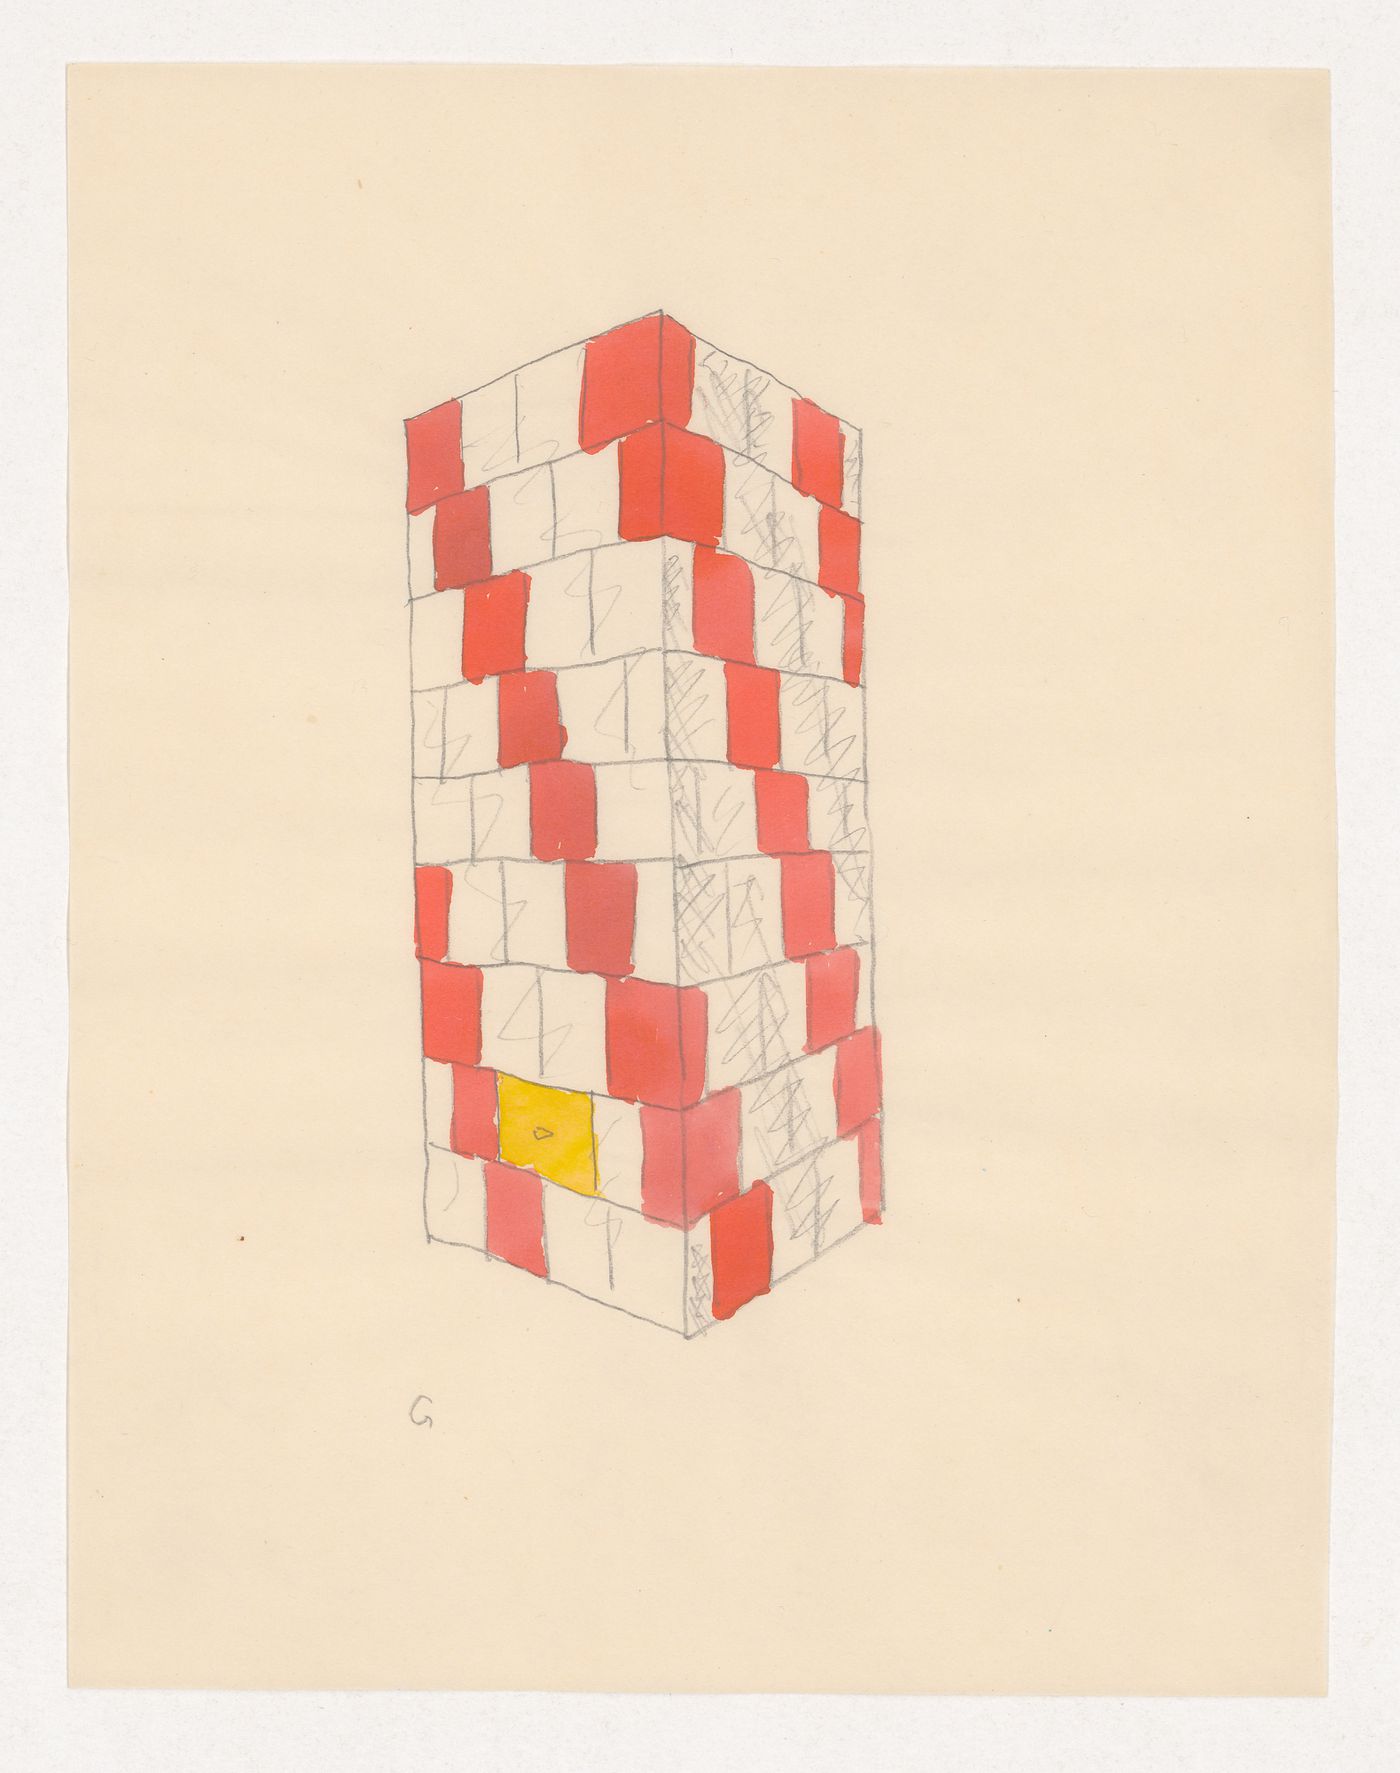 Perspective sketch for a tiled stove decorated with a red geometric pattern